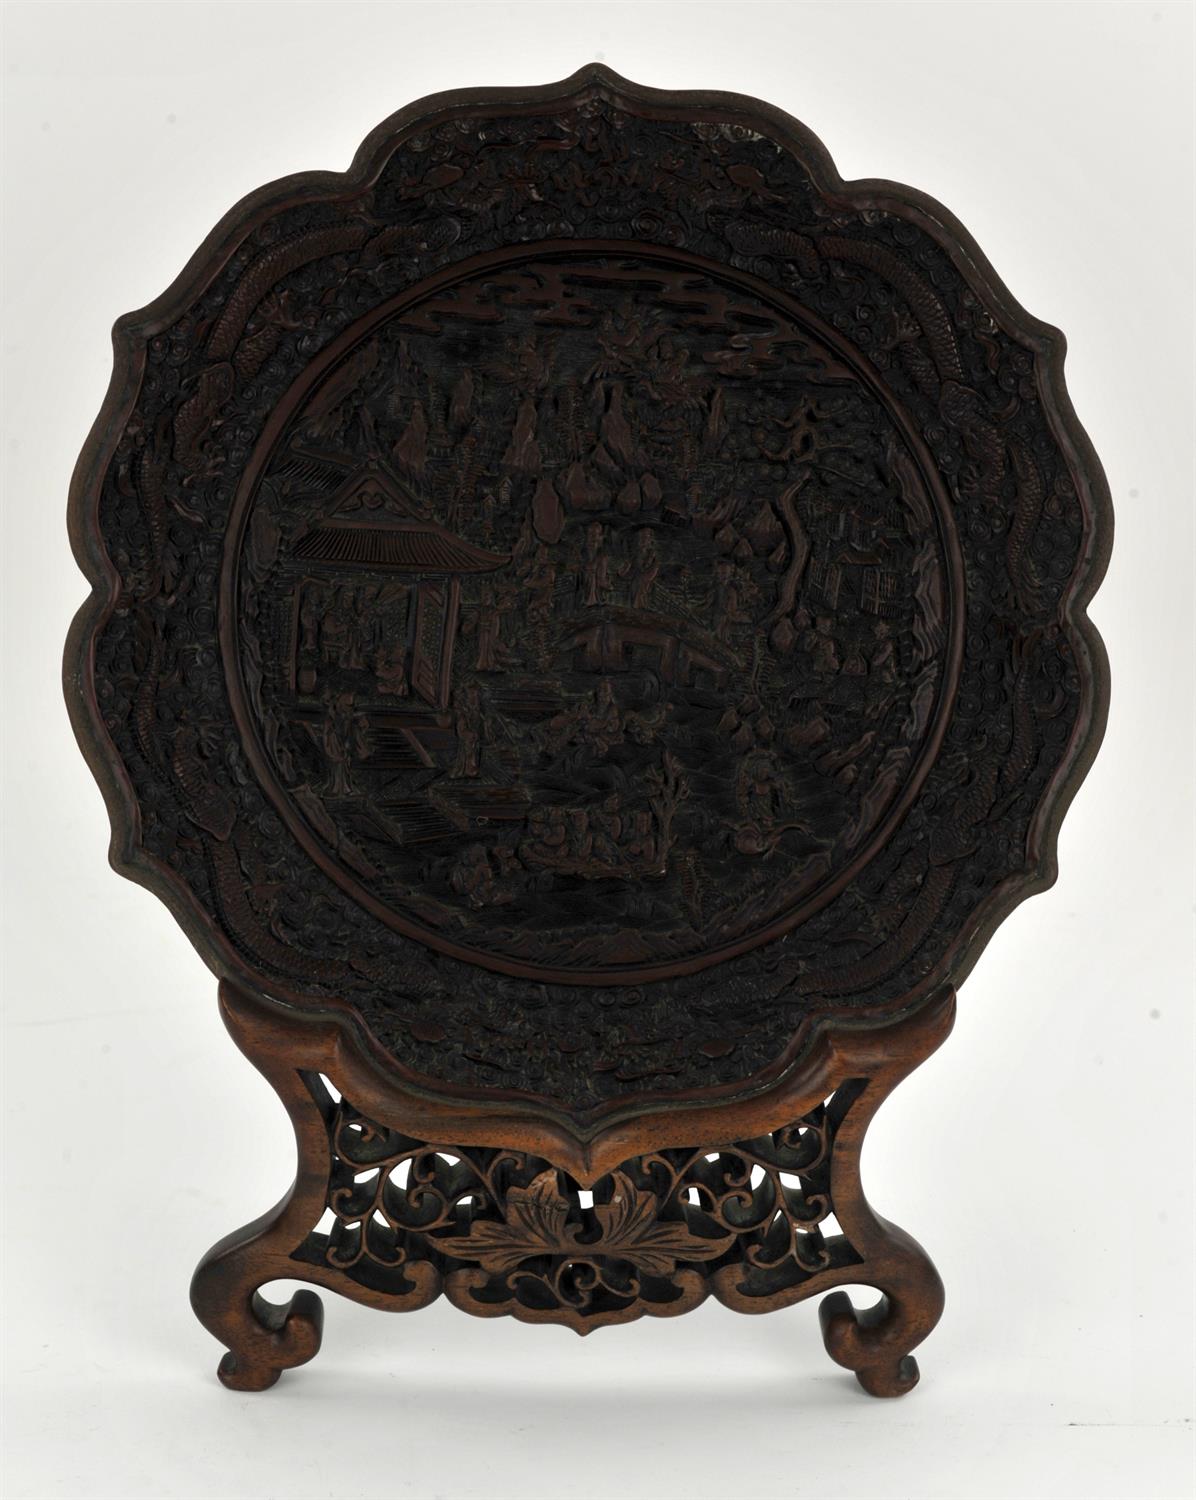 A Chinese Cinnabar Lacquer Dish , Qing dynasty. Its petalate rim finished with a metal band above - Image 14 of 16